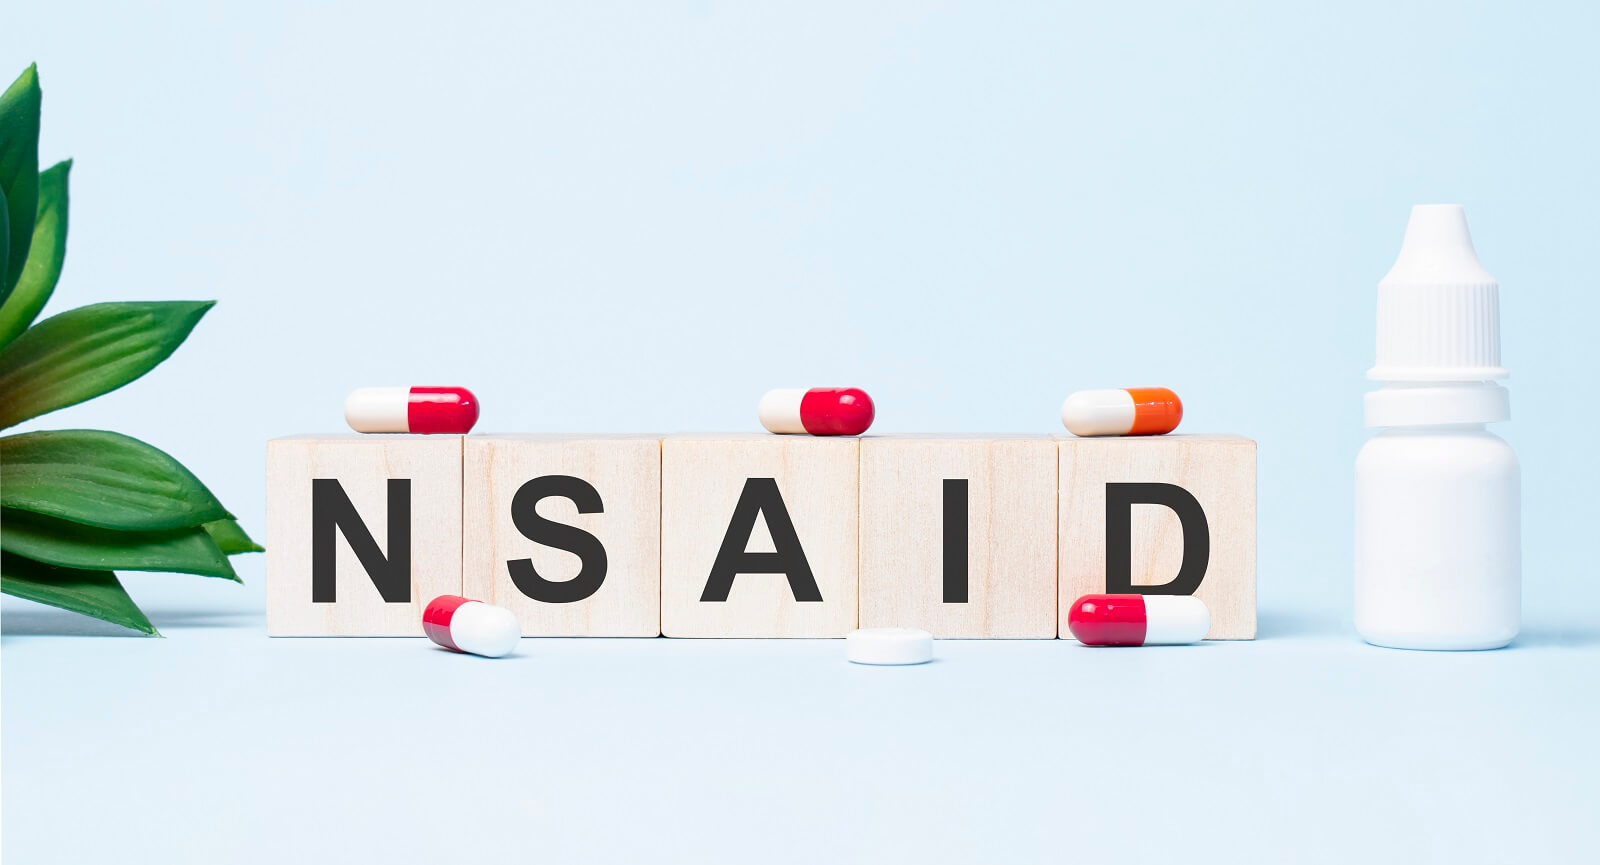 Nsaid word made with building blocks. A row of wooden cubes with a word written in black font is located on white background.